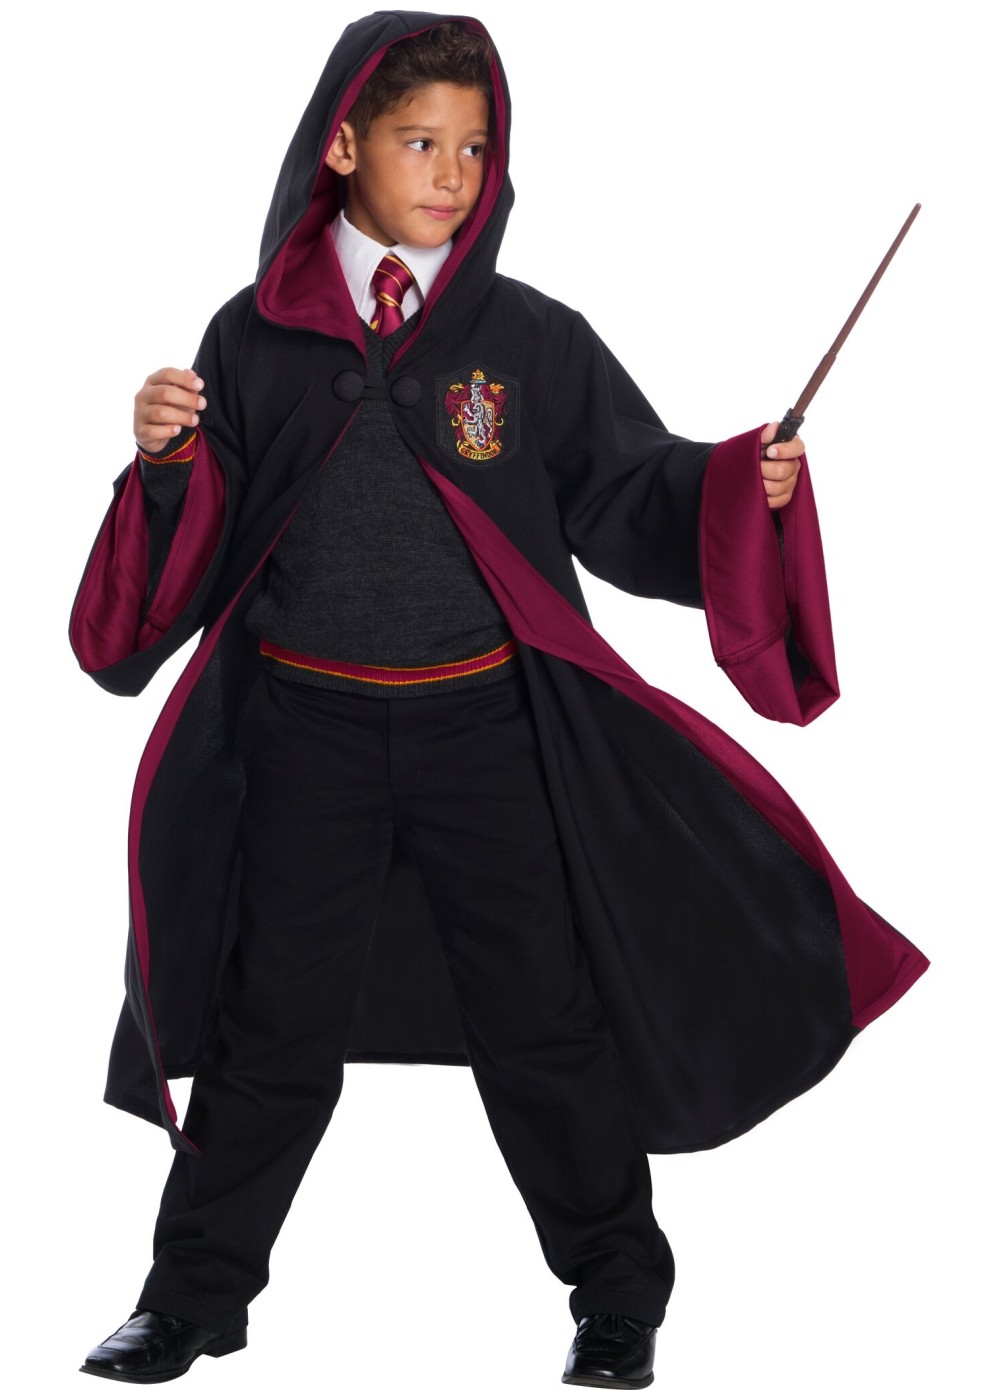 Gryffindor Student Costume - Cosplay Costumes